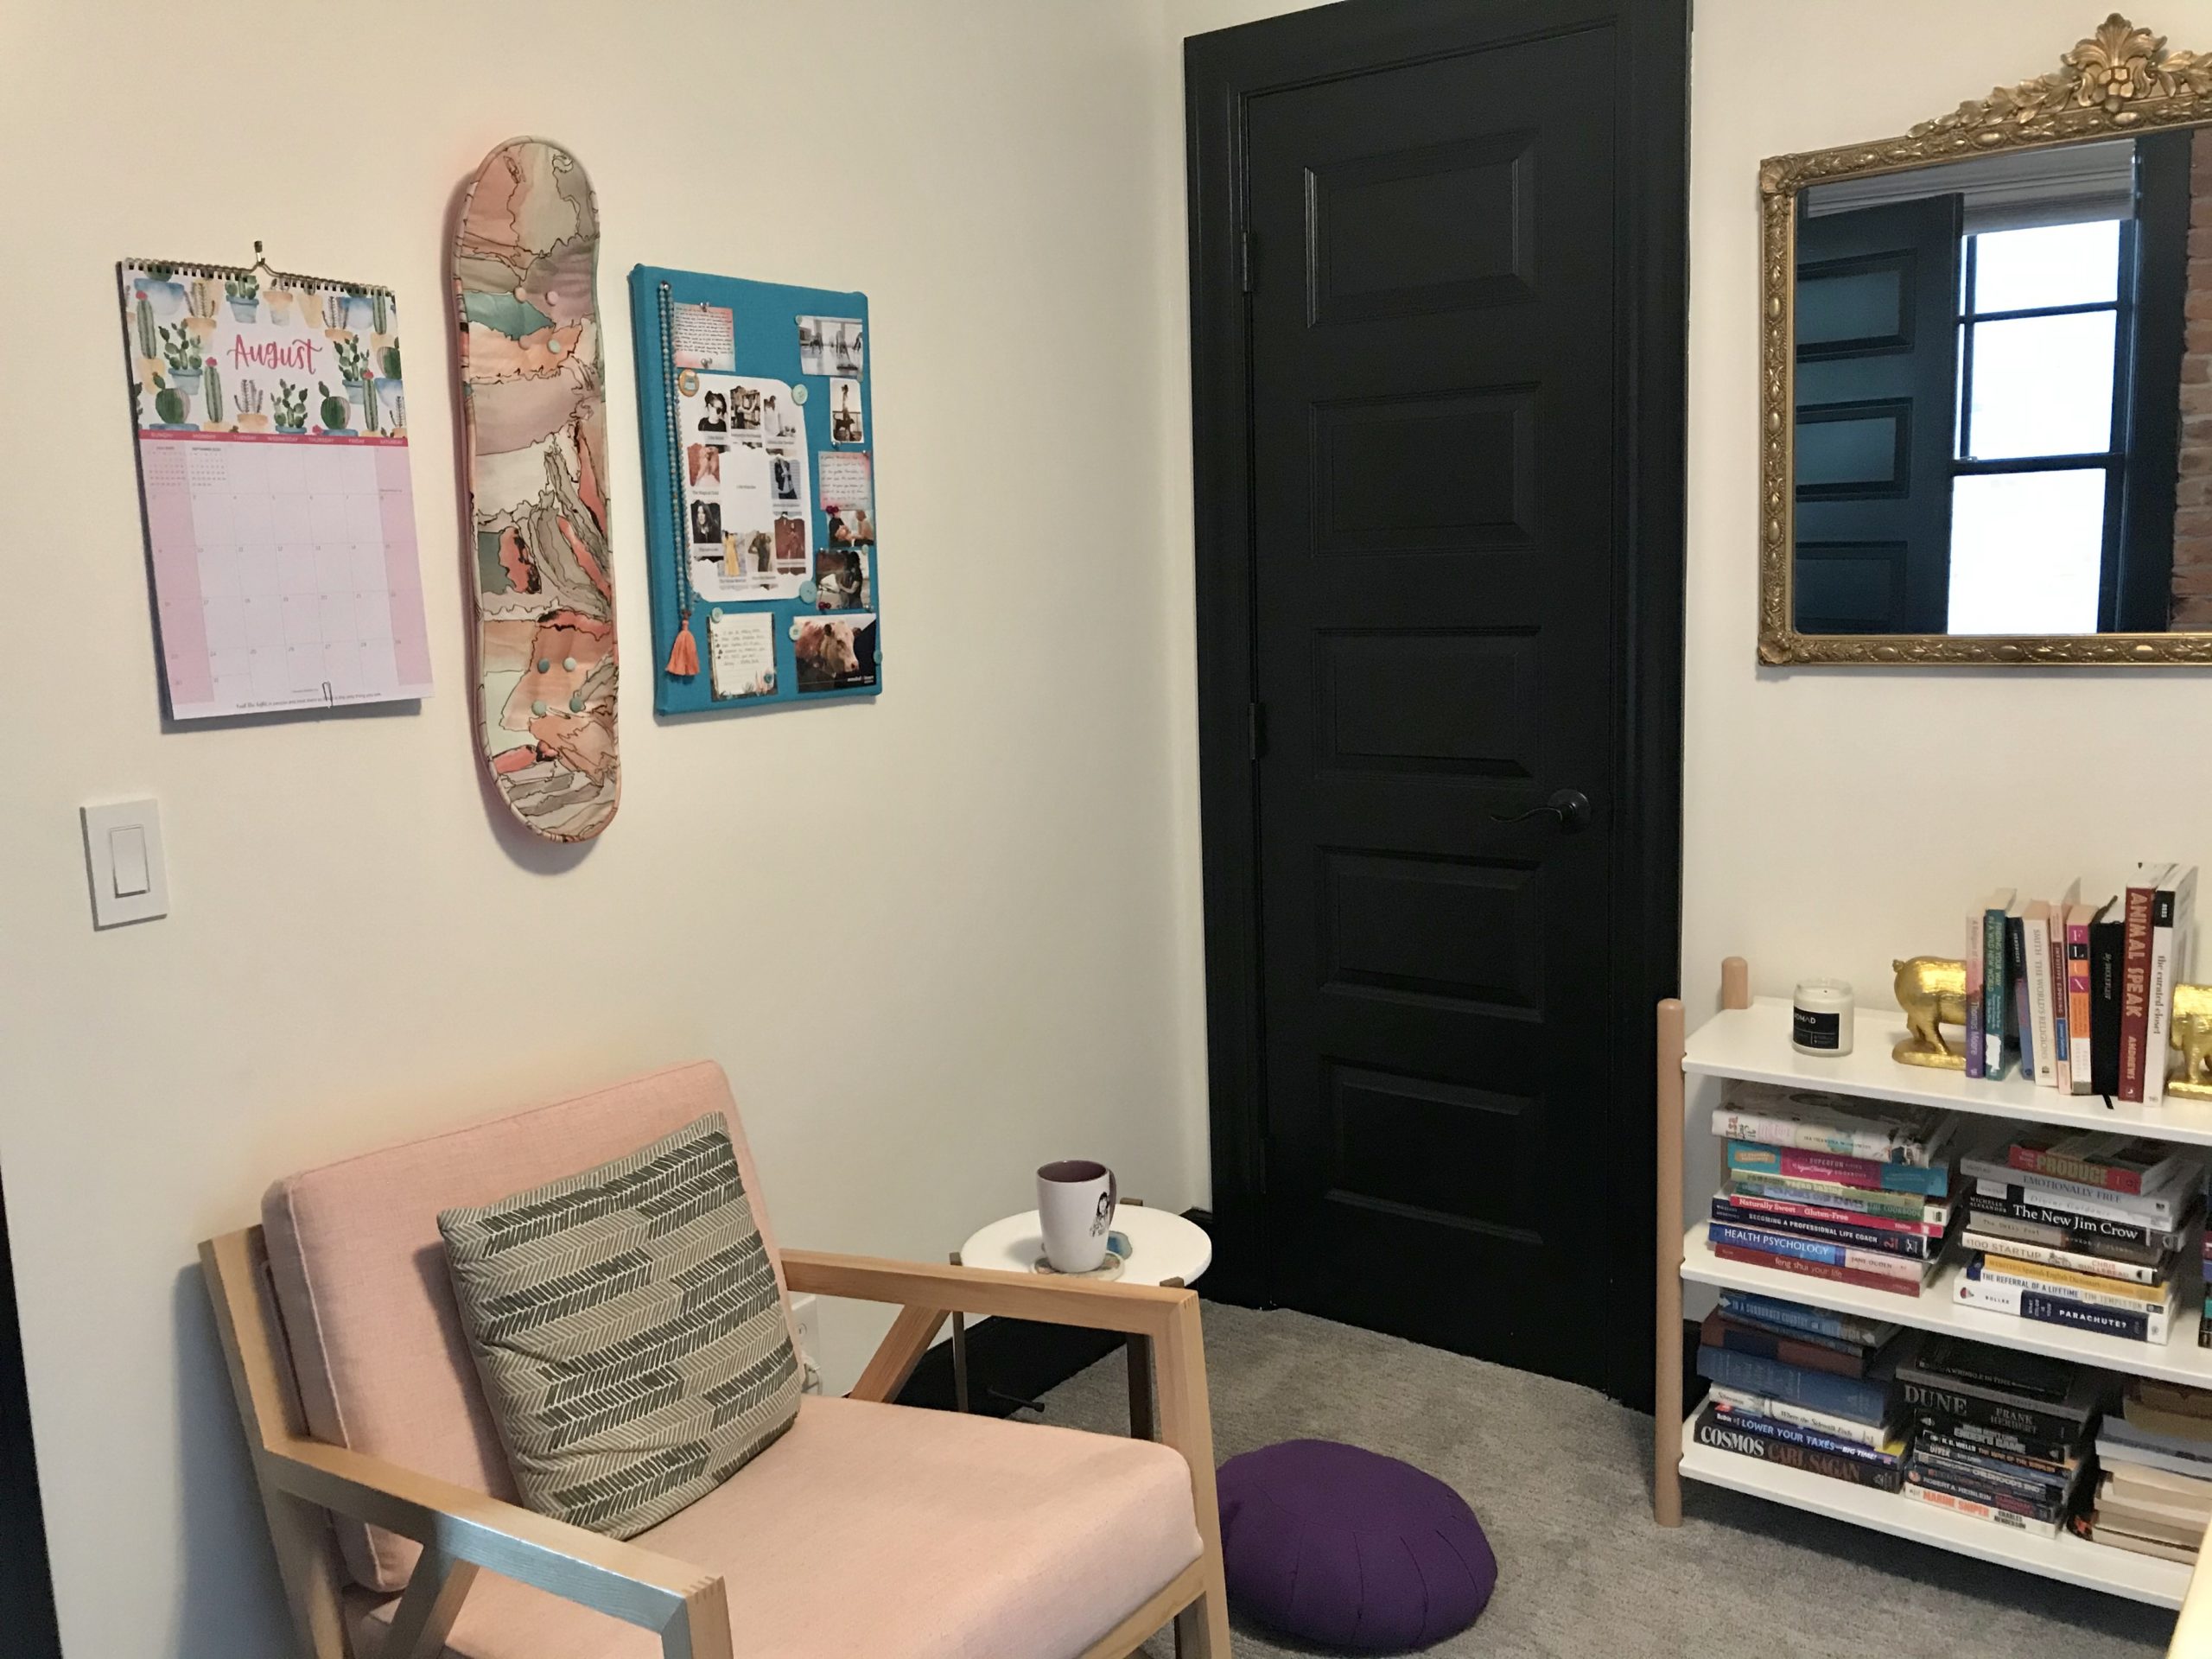 my home office with DIY materials like a calendar, books, and a vision board